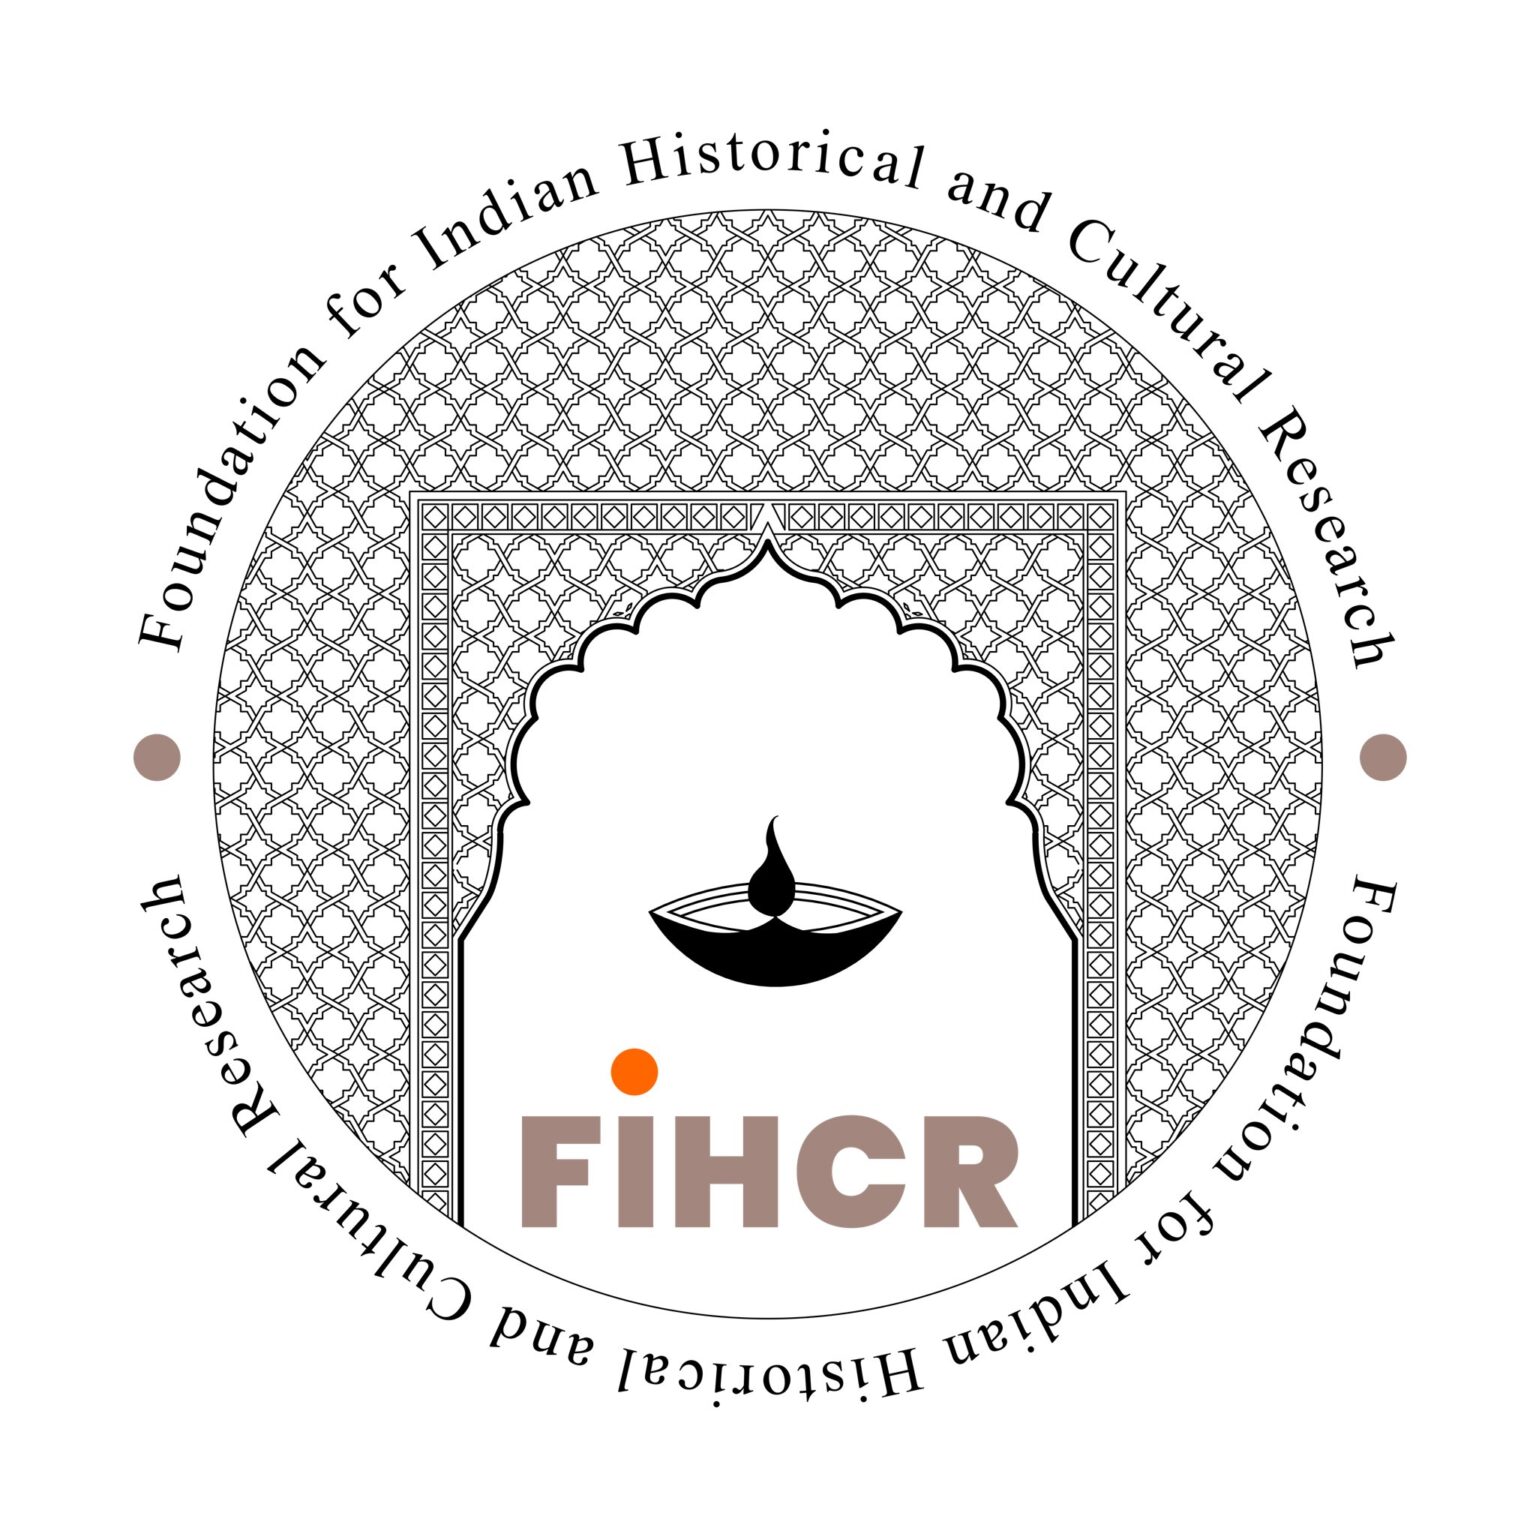 vikram sampath Foundation for Indian Historical and Cultural Research